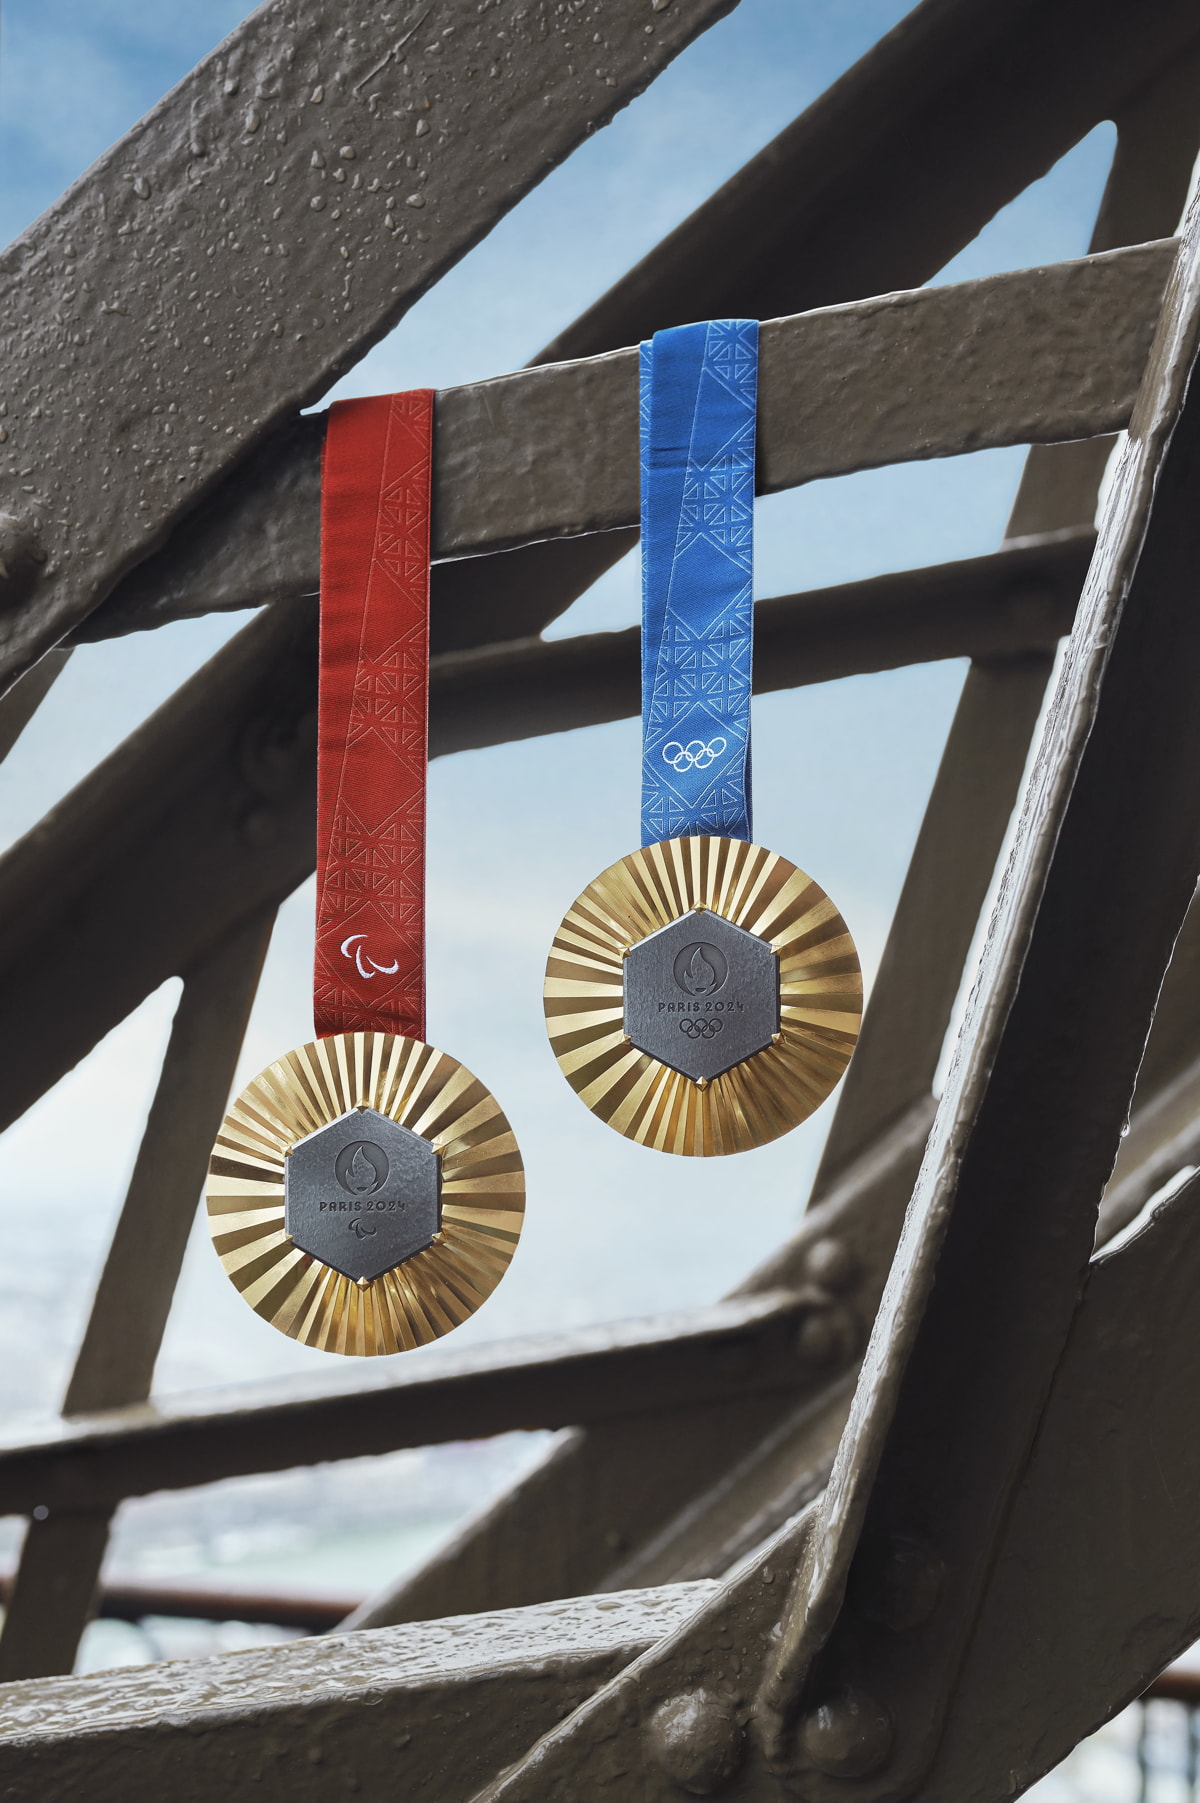 Paris 2024 medals to contain a piece of the Eiffel Tower Paralympics